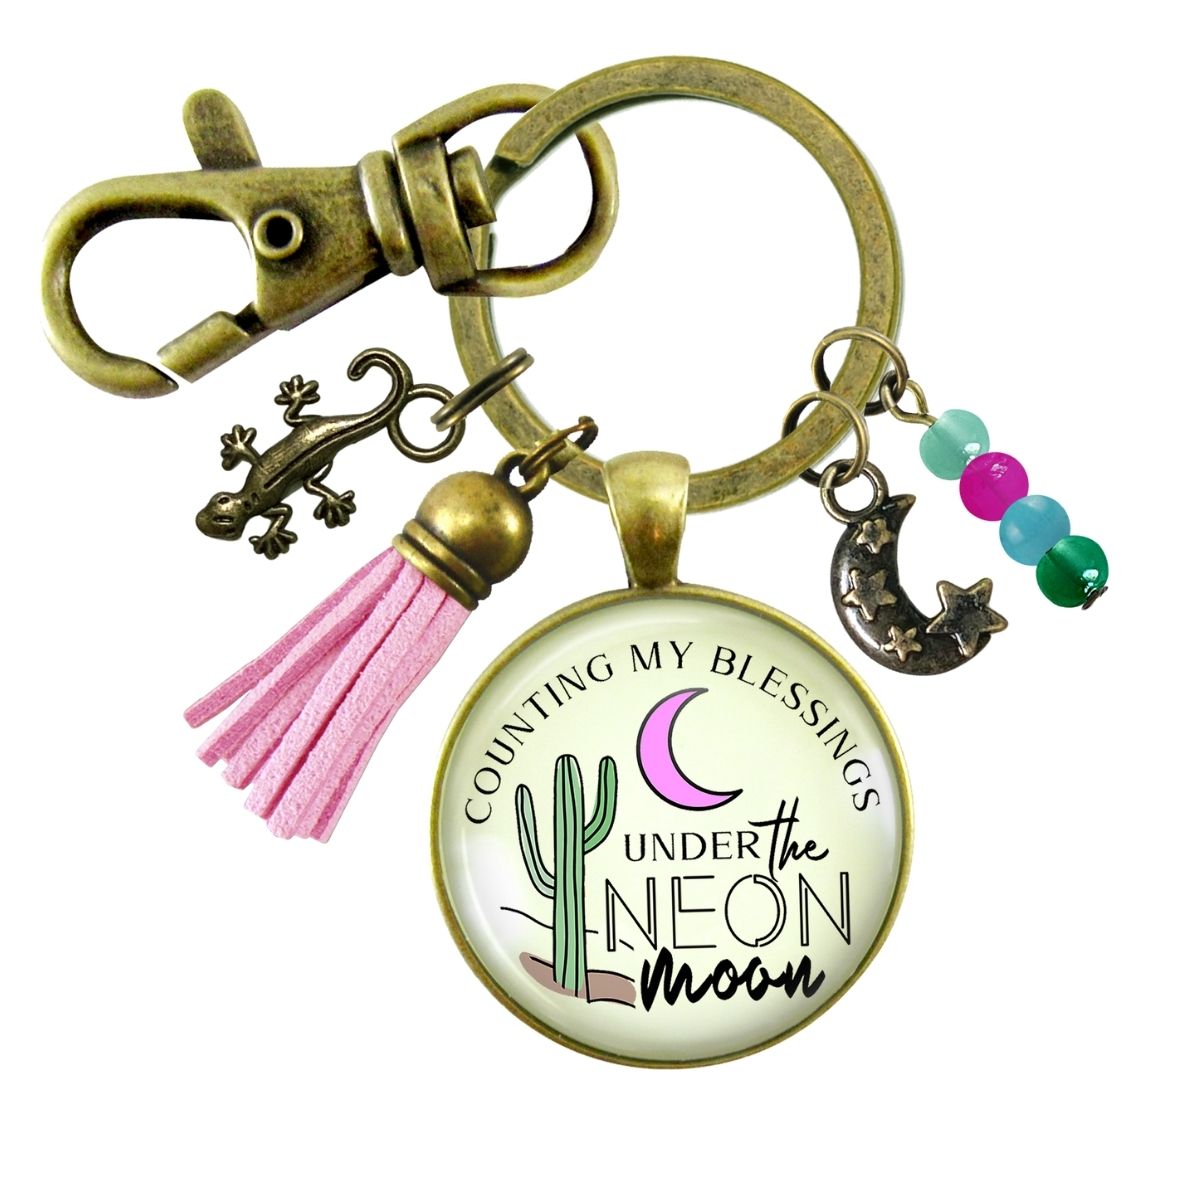 Handmade Gutsy Goodness Jewelry Counting My Blessings Under The Neon Moon Keychain Southwest Boho Jewelry Tassel & Gecko Charms & Card